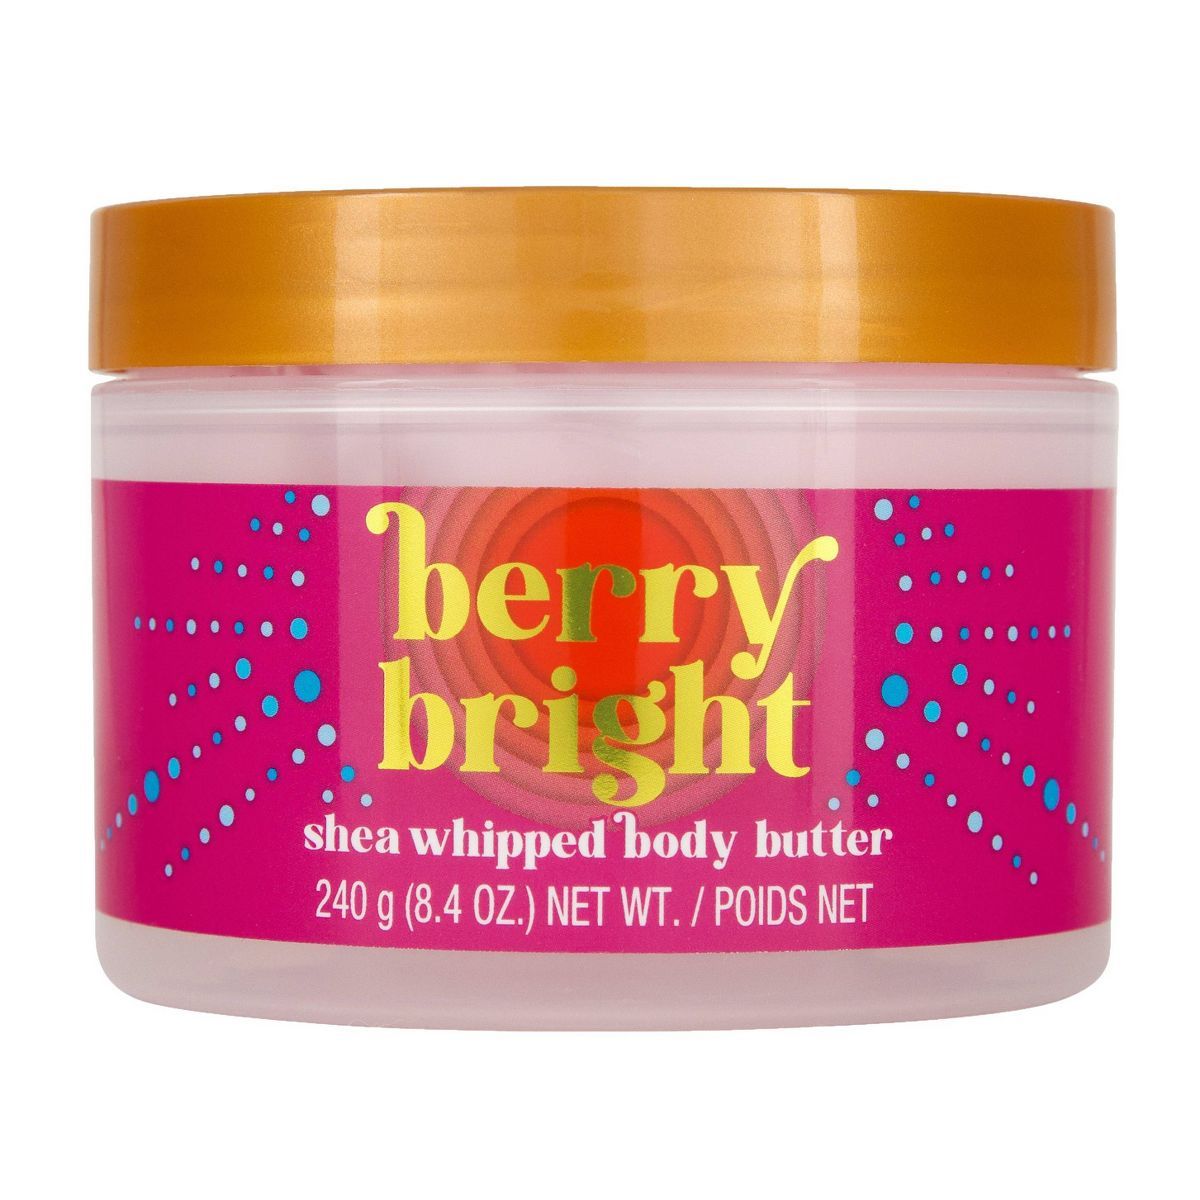 Tree Hut Berry Bright Whipped Body Butter - 8.4oz | Target